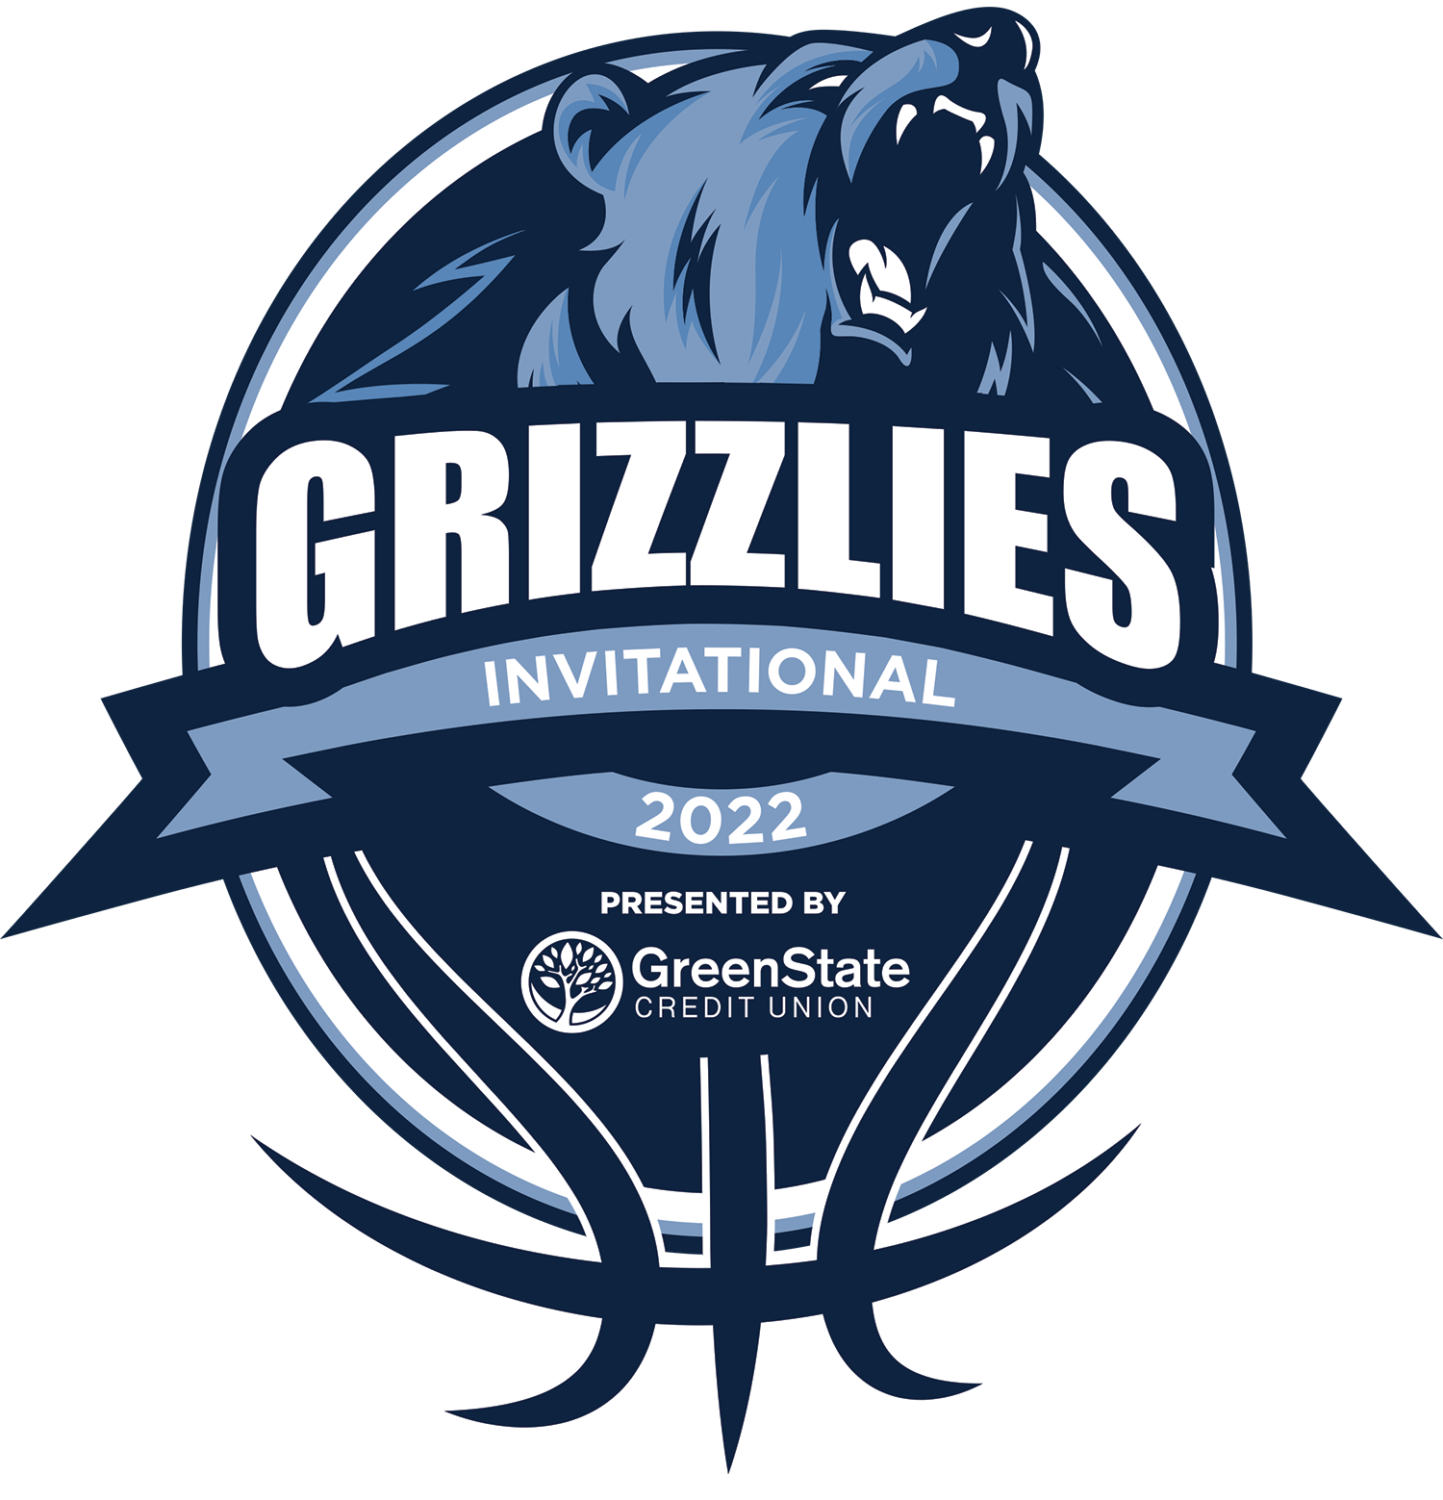 A blue grizzly bear raising its head in a roar on top of the wordS GRIZZLIES INVITATIONAL 2022 presented by GreenState Credit Union and the outline of a basketball.